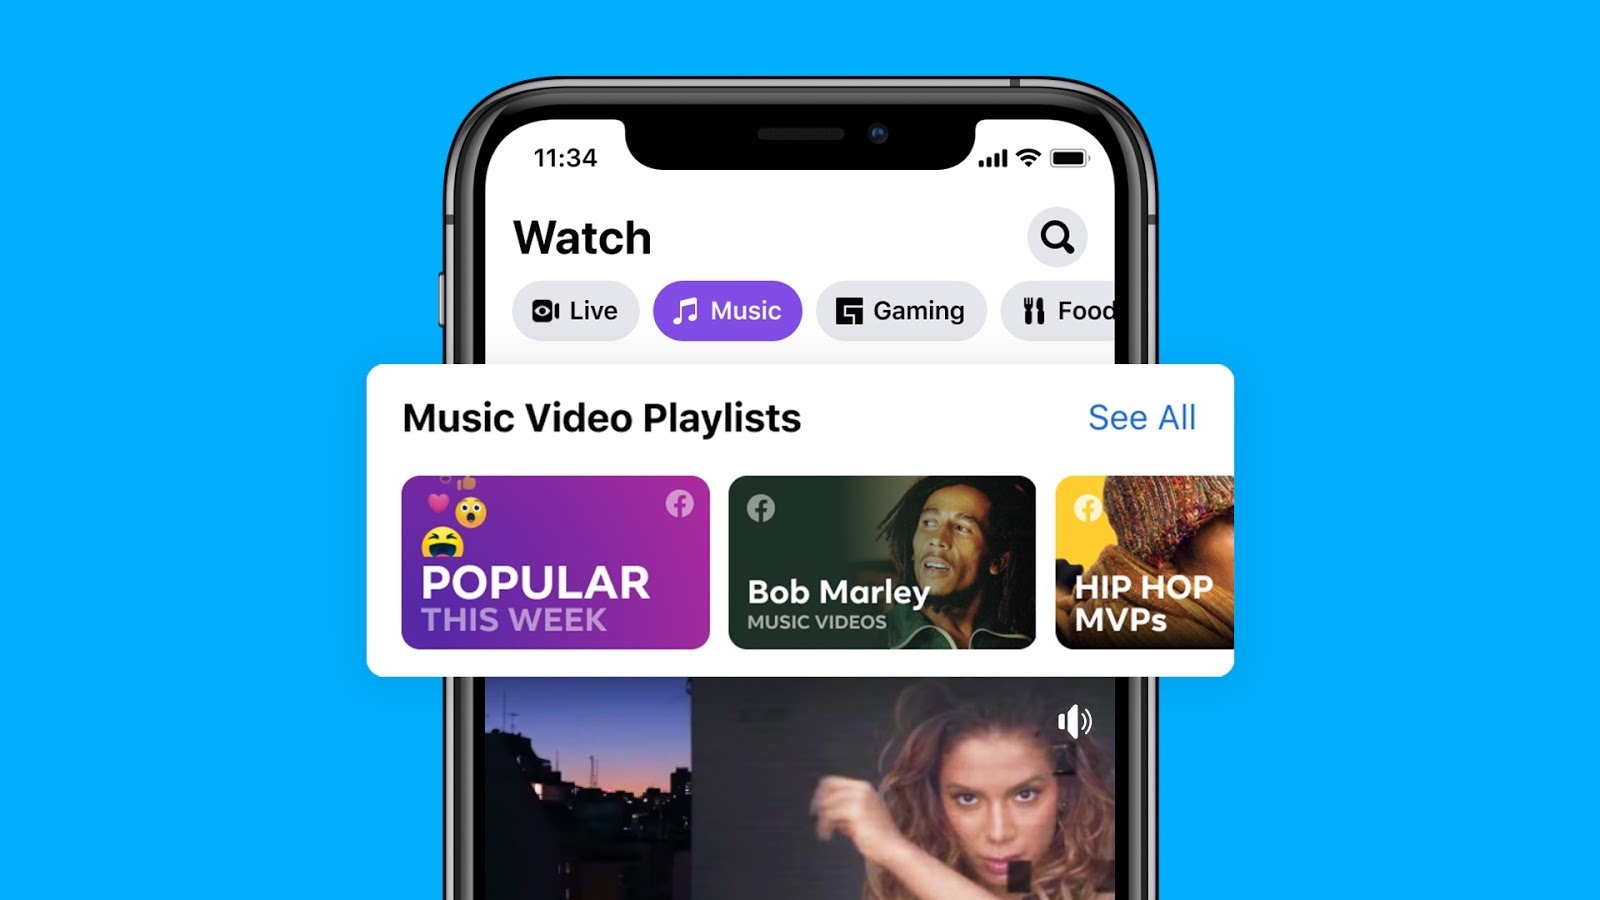 Facebook launches Music Videos this weekend, connecting artists and fans like never before